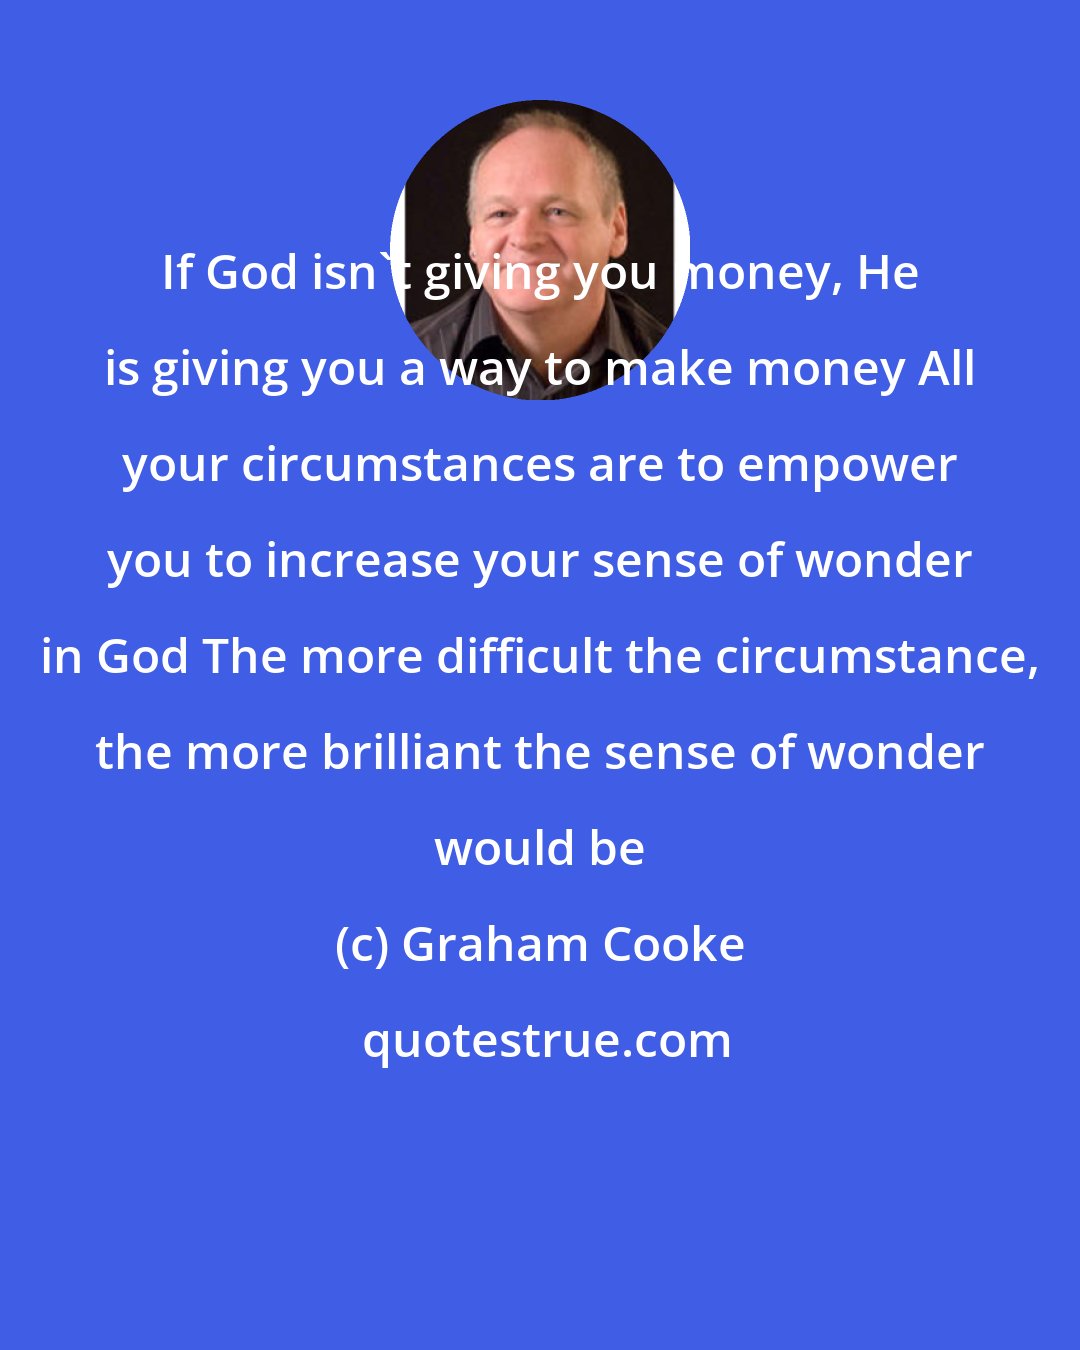 Graham Cooke: If God isn't giving you money, He is giving you a way to make money All your circumstances are to empower you to increase your sense of wonder in God The more difficult the circumstance, the more brilliant the sense of wonder would be